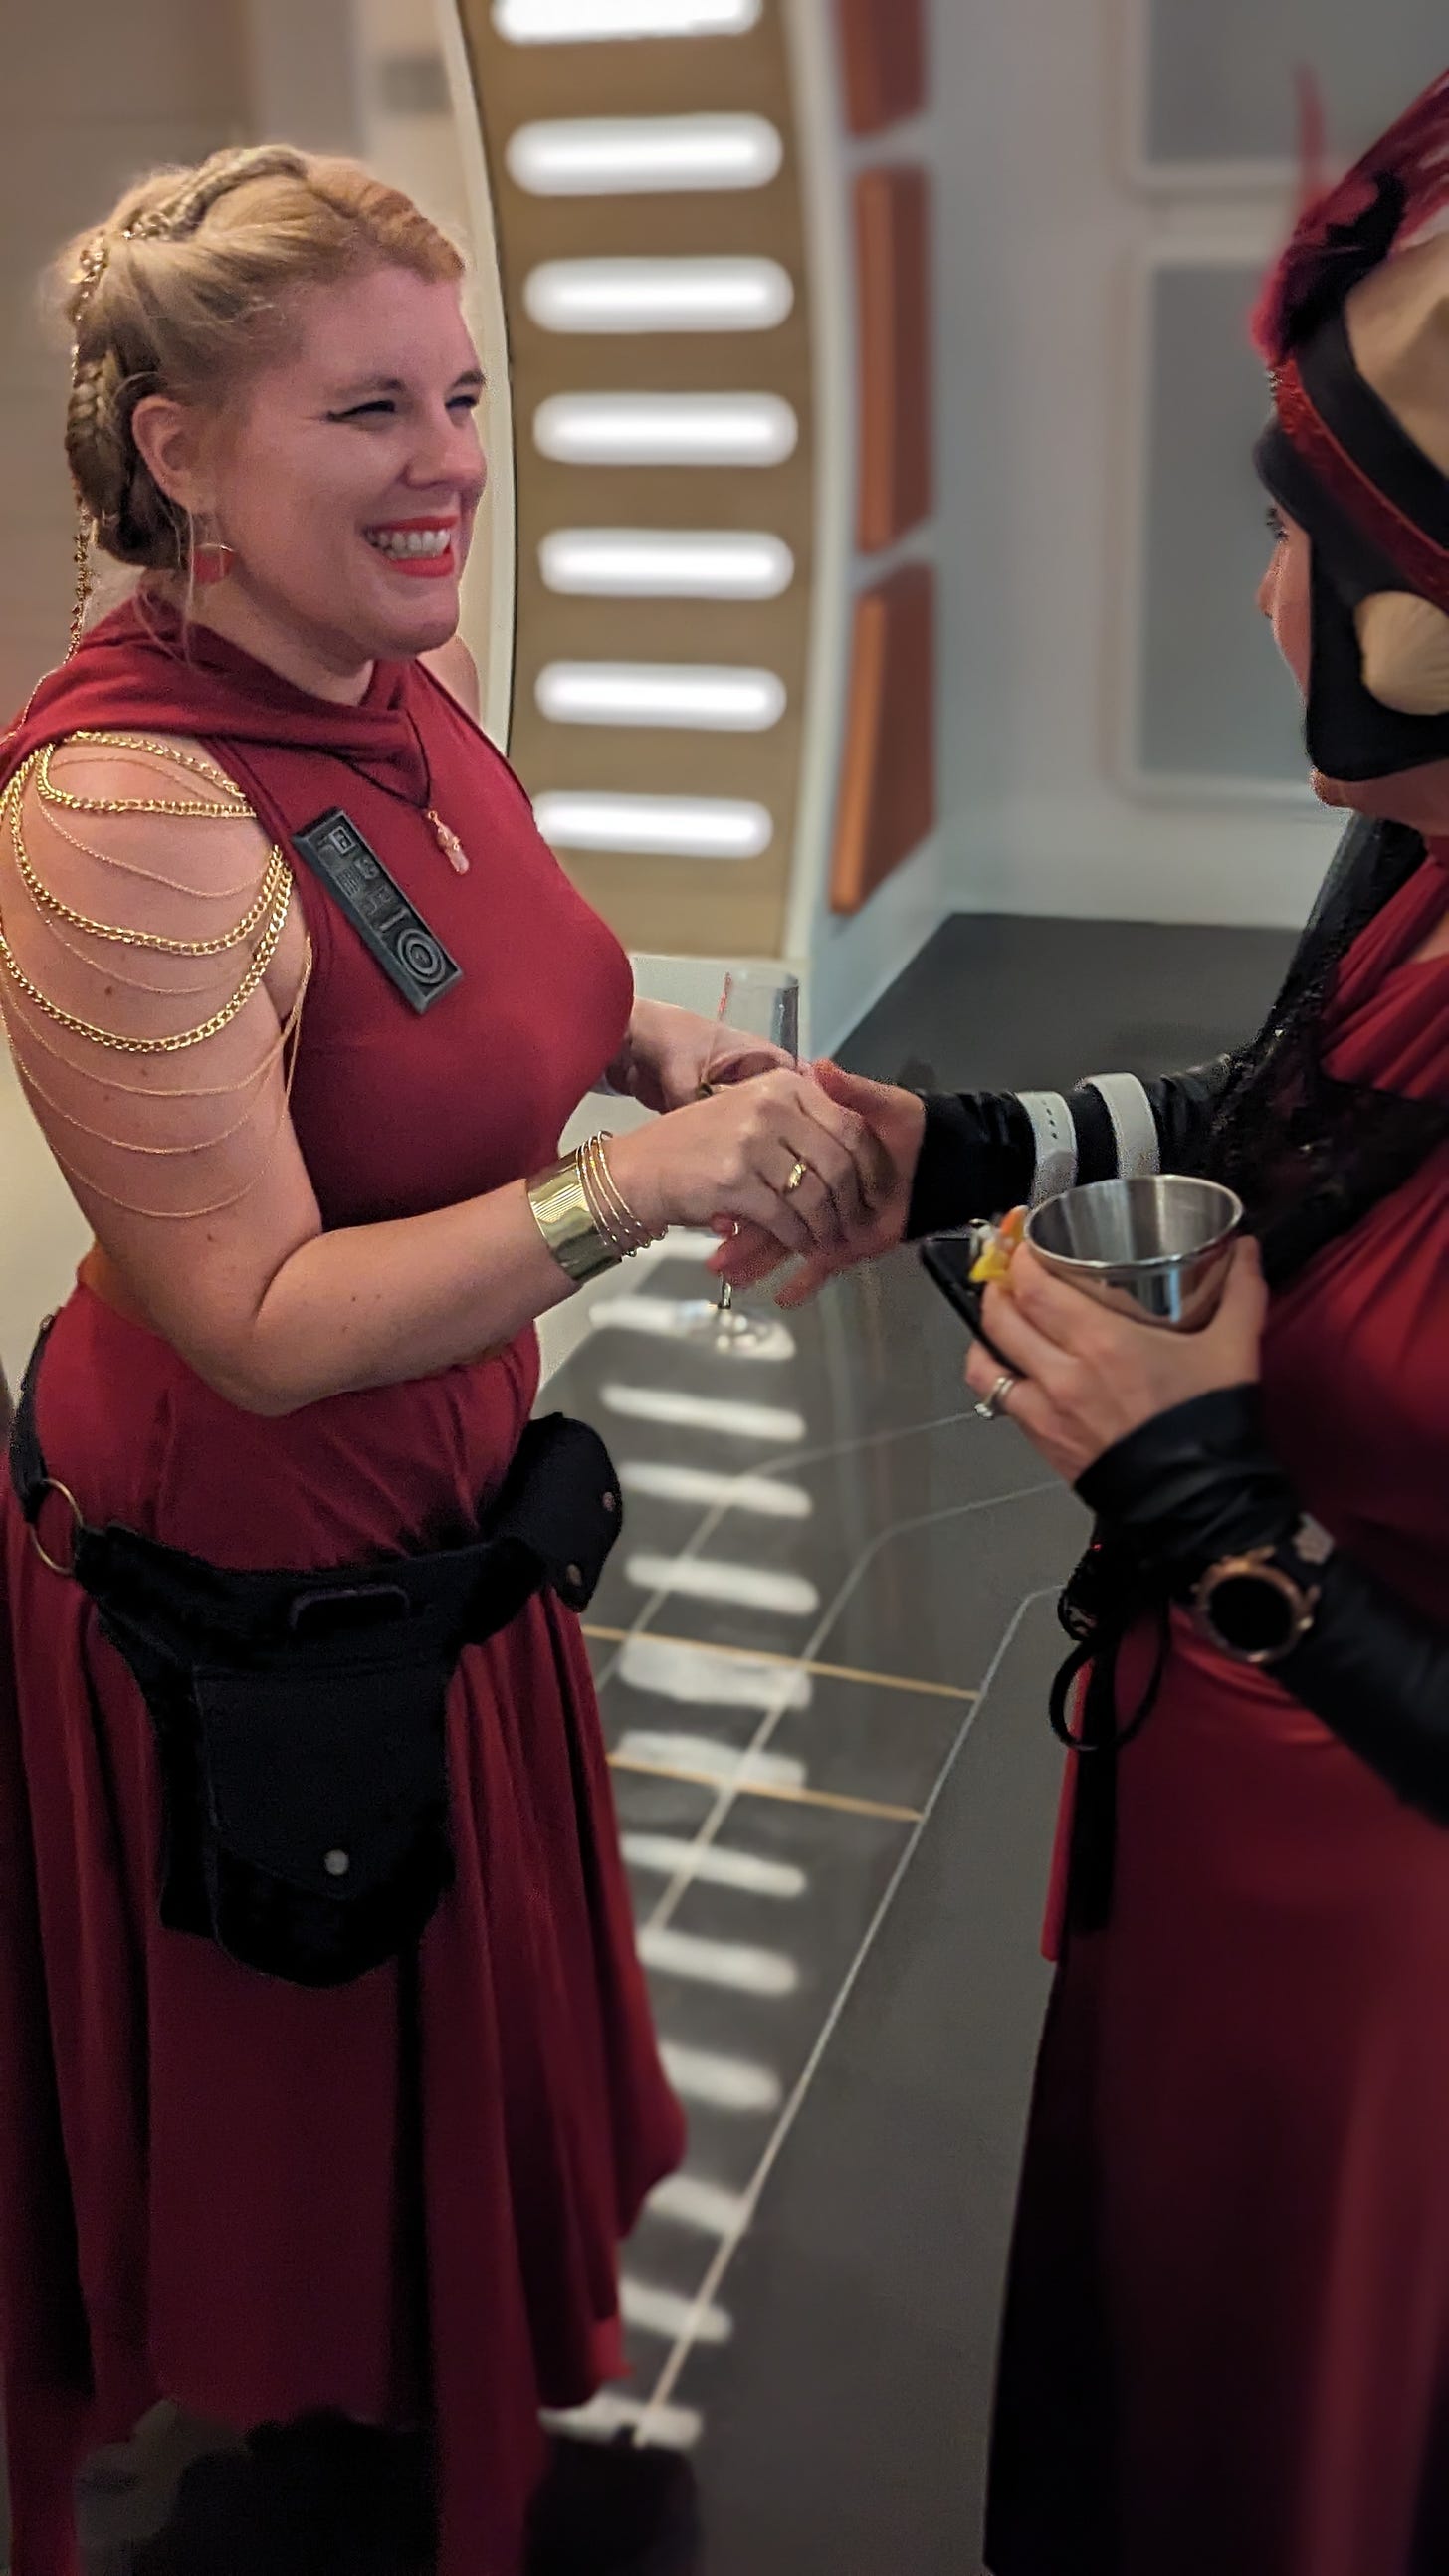 Cass smiling and greeting a Twi'lek passenger